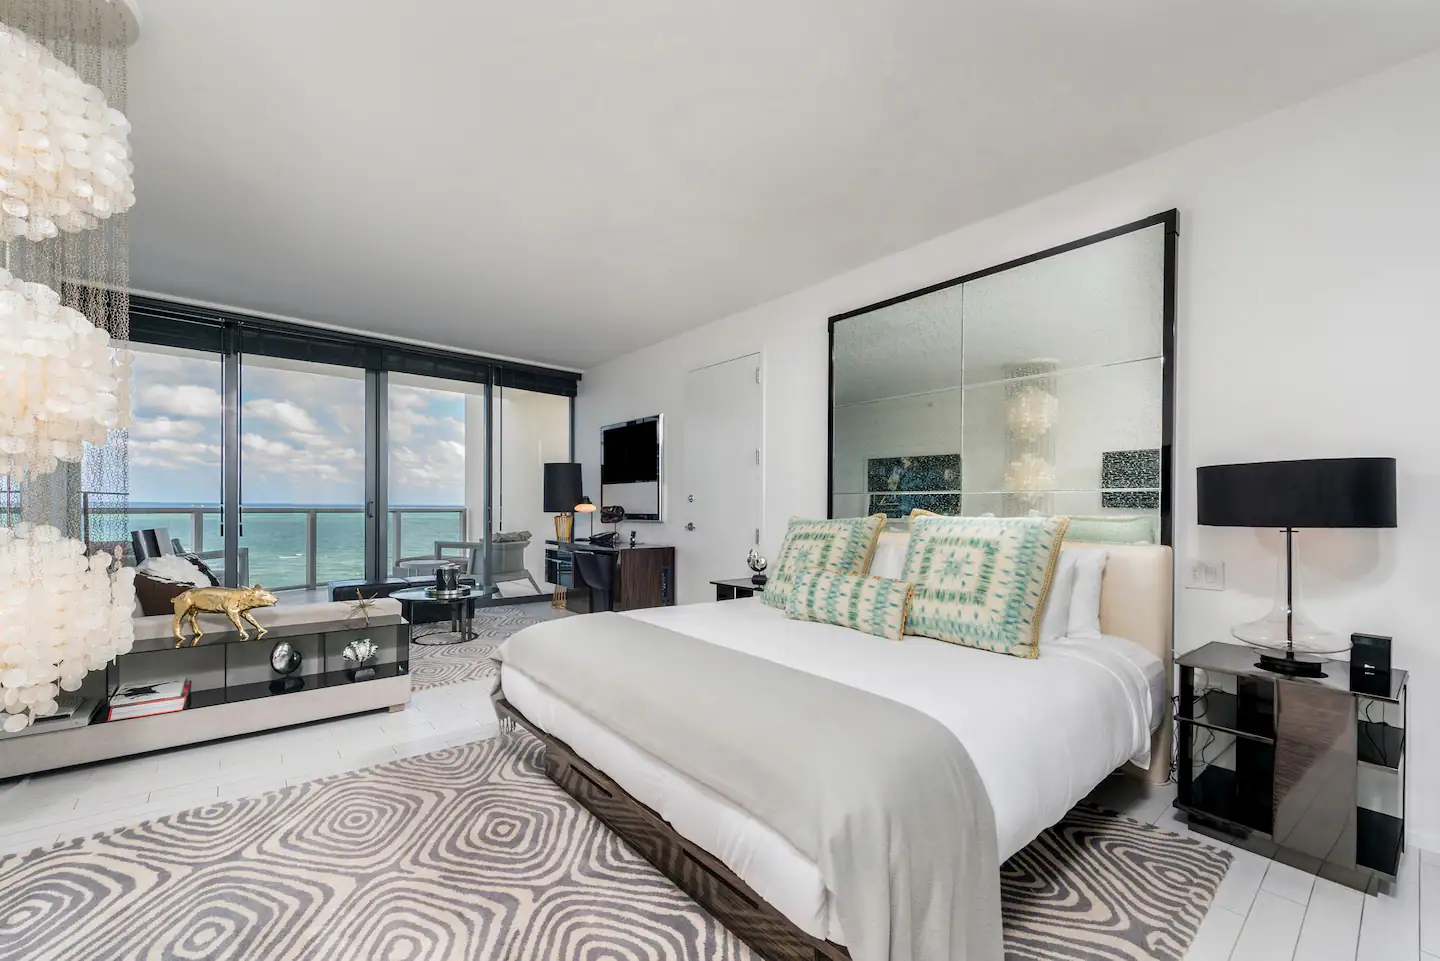 More than 1,900 square feet of space at this luxury property includes three bedrooms with king beds, en-suite bathrooms, balconies, and ocean views.